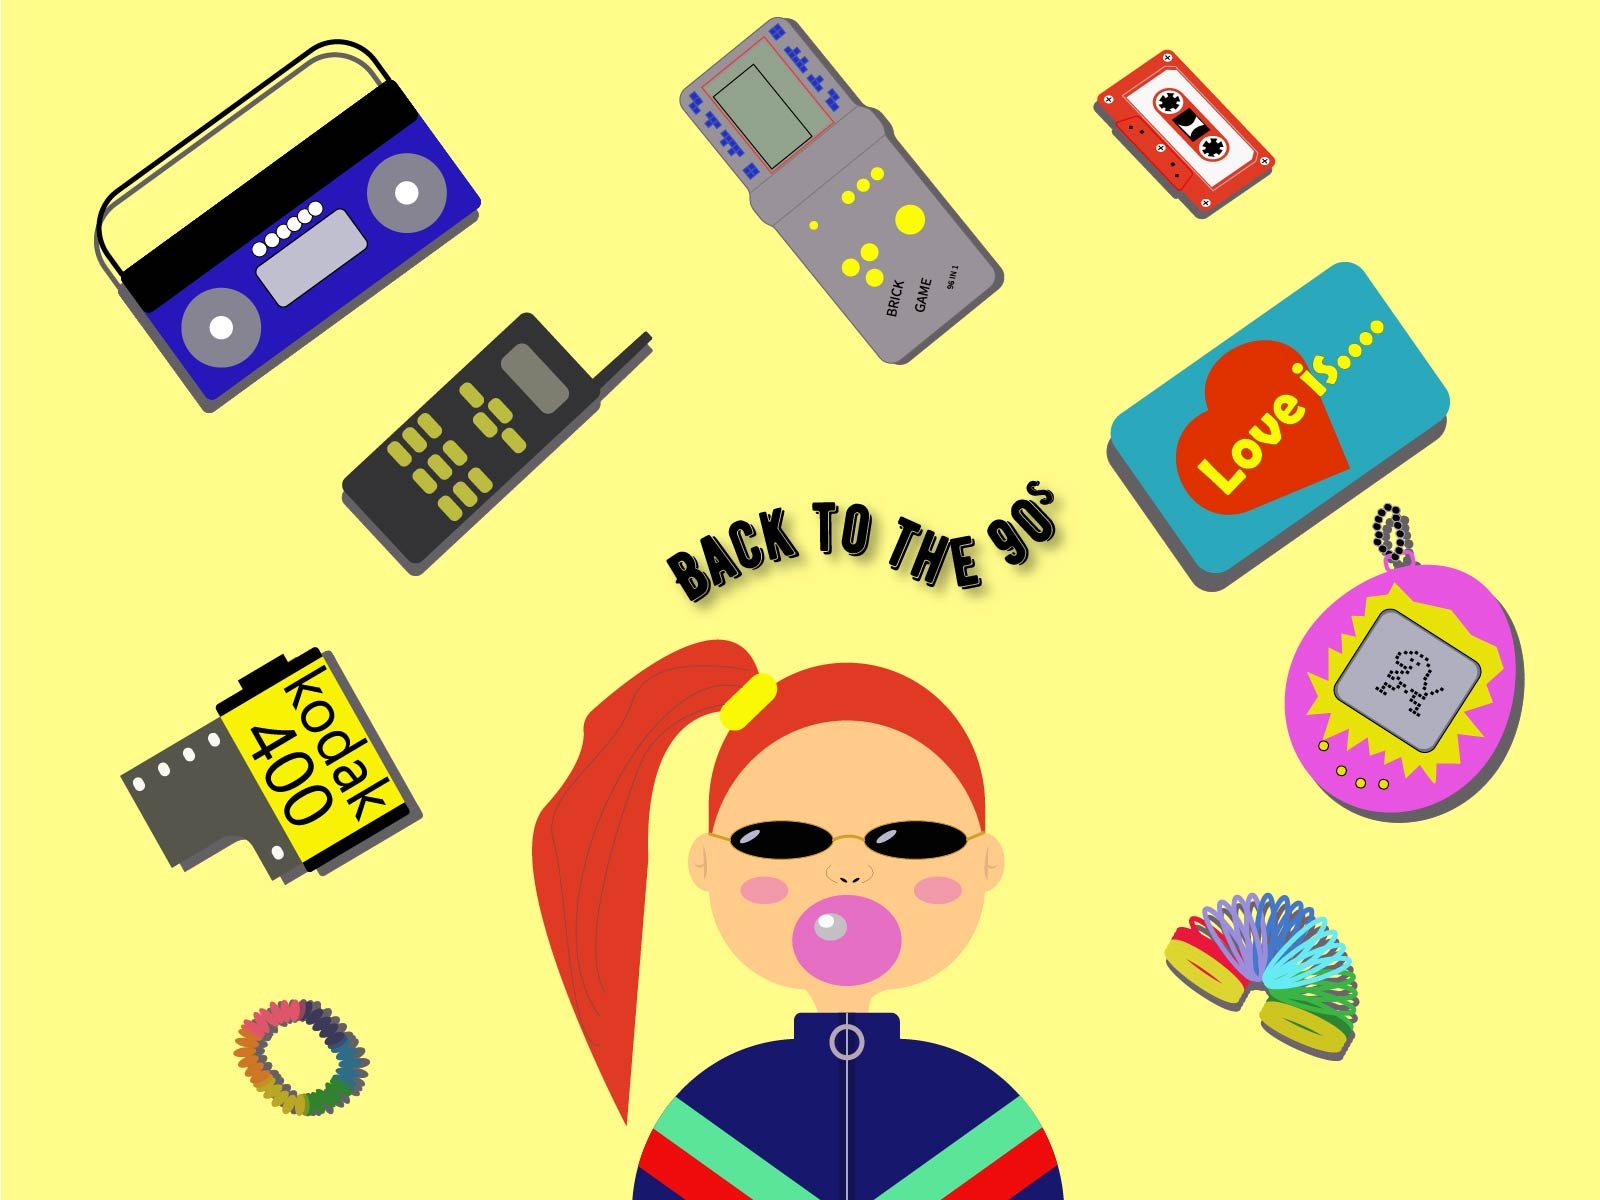 Backto90s designs, themes, templates and downloadable graphic 